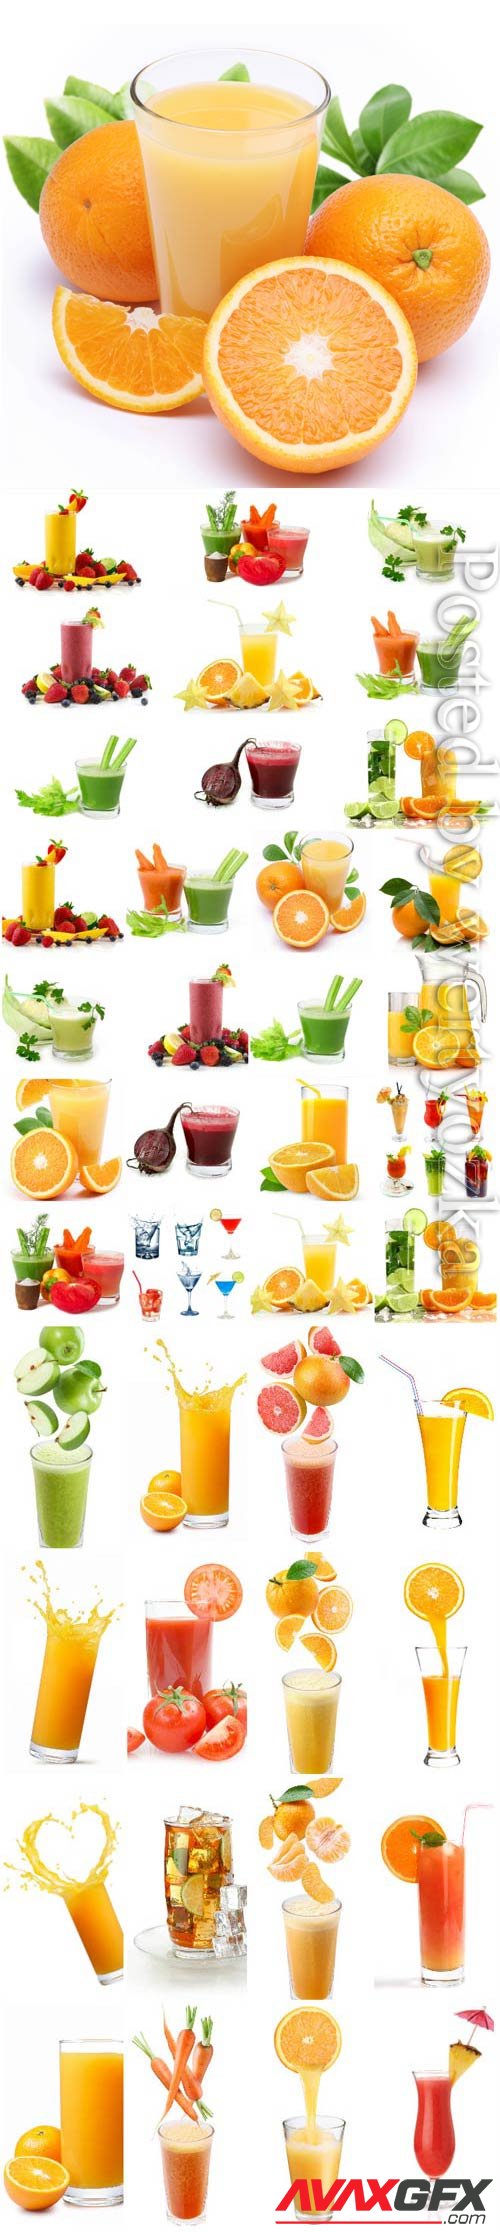 Fresh juices and fruit cocktails stock photo